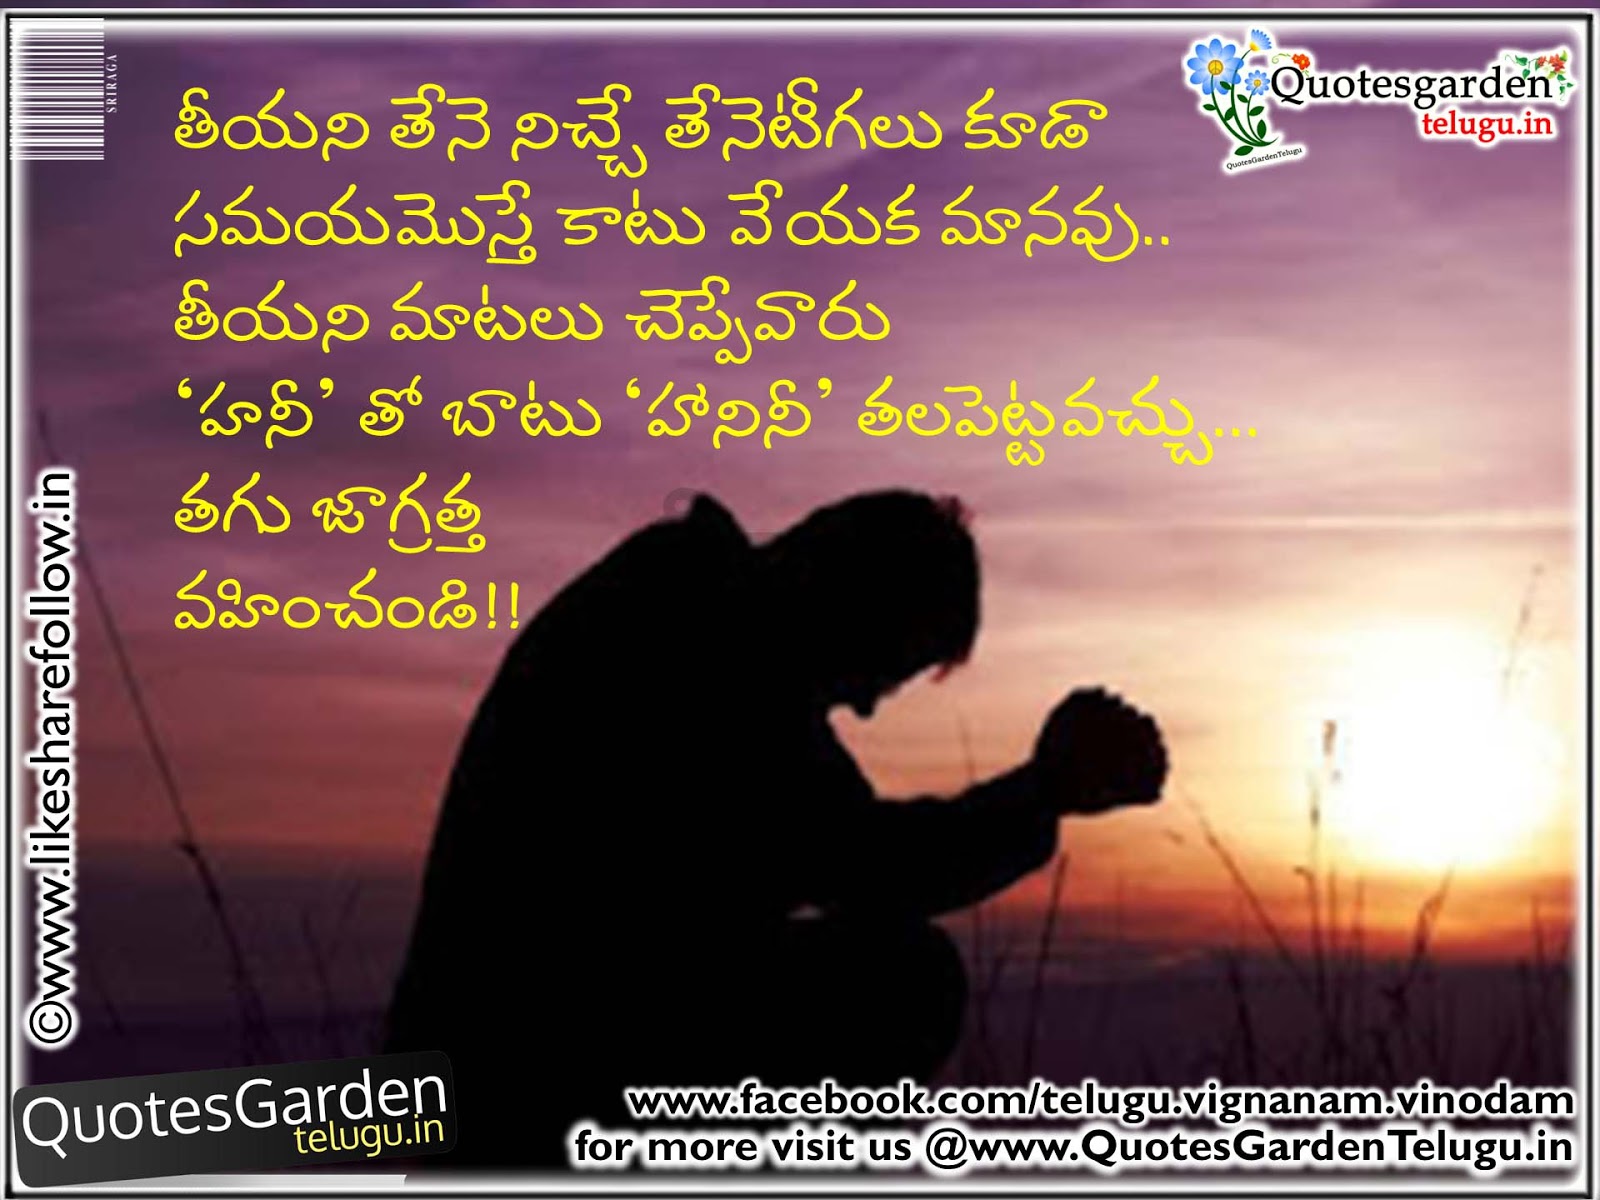 Telugu life quotes about relationship